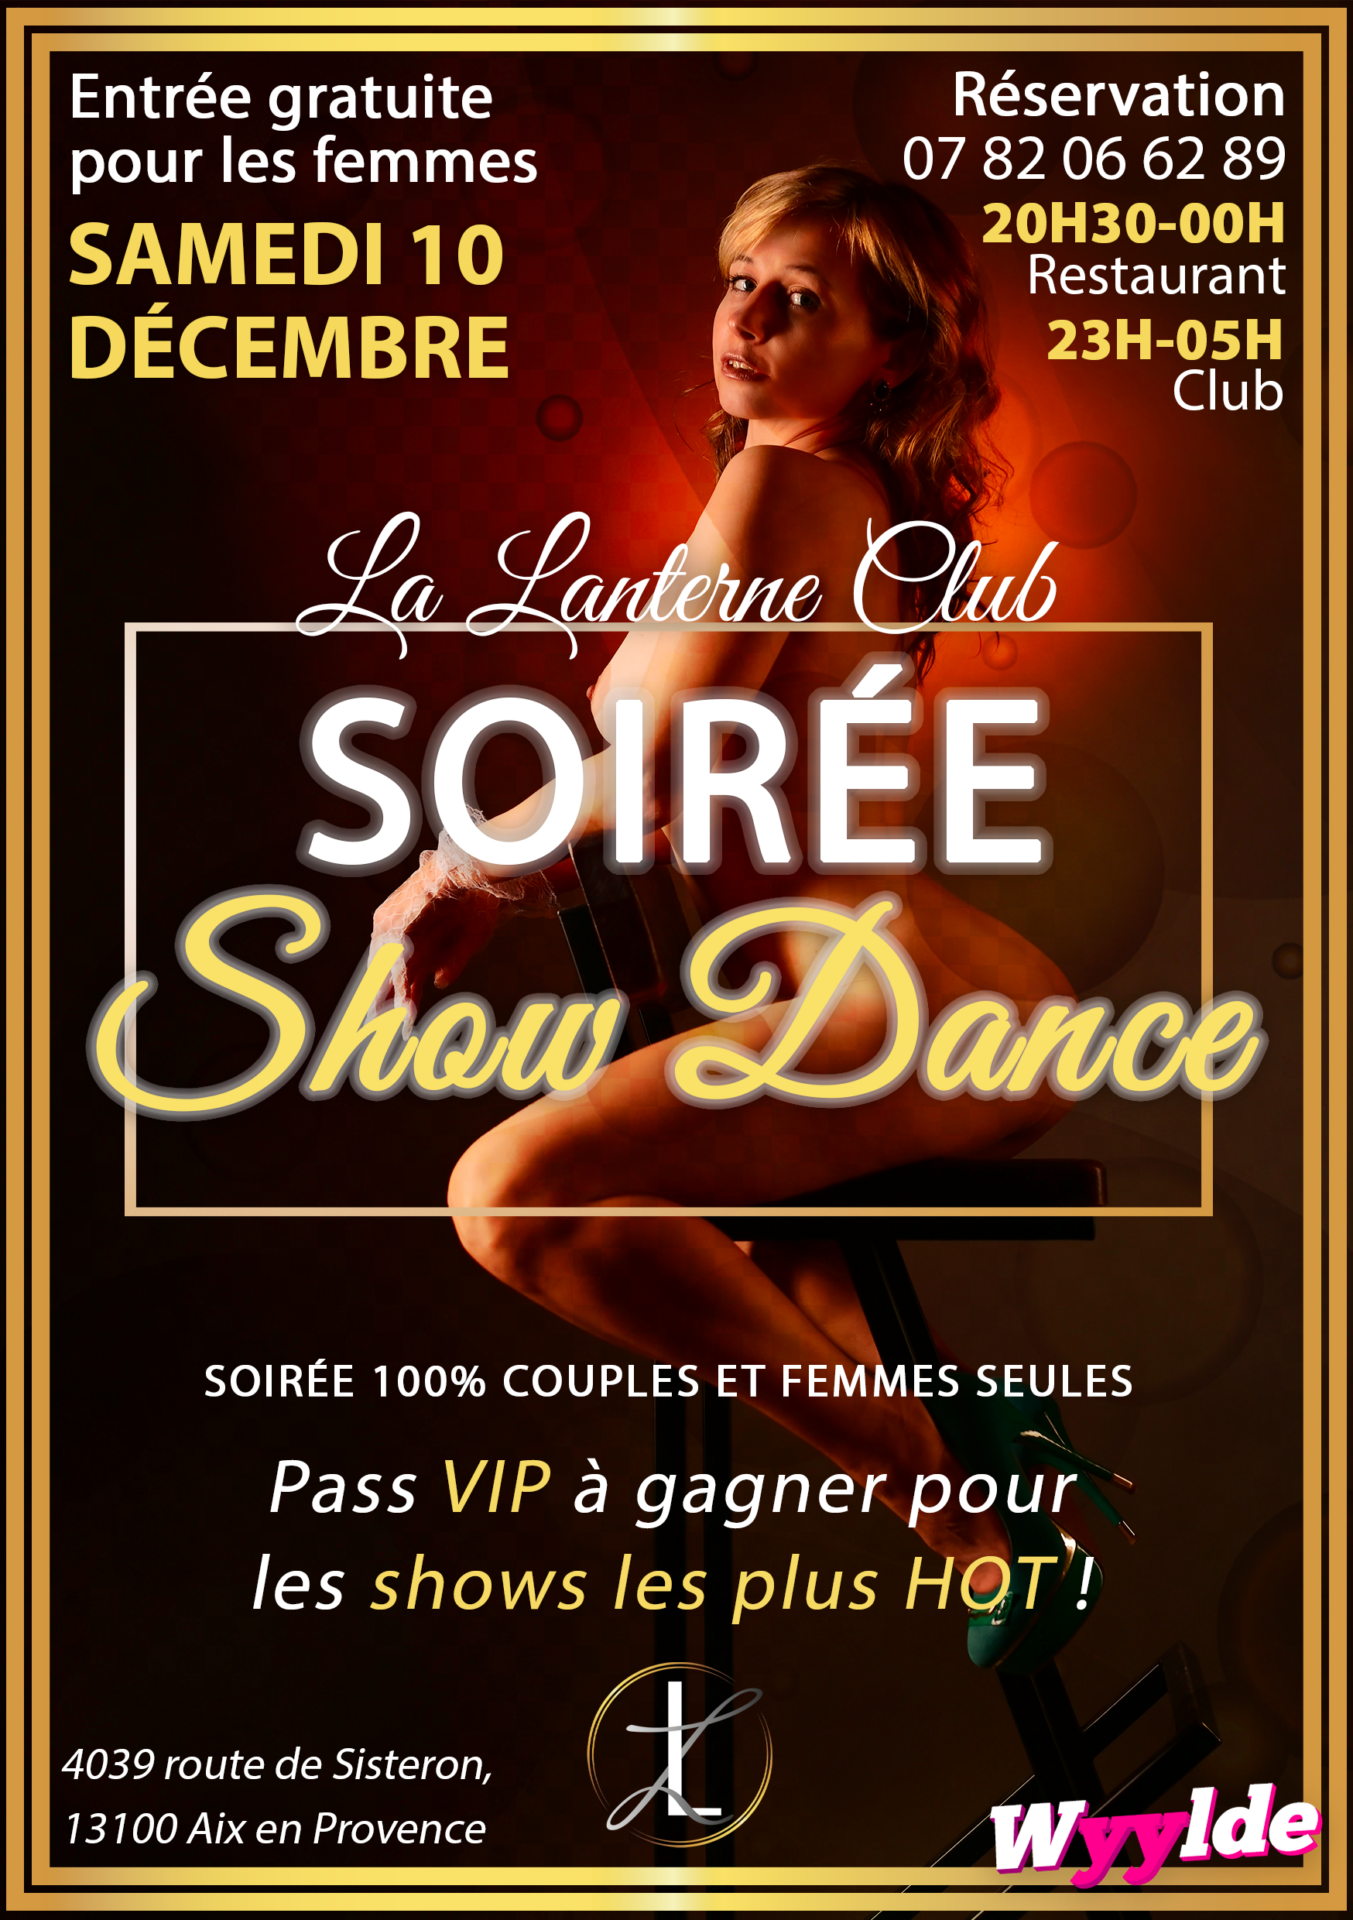 Evening-Show-Dance - Saturday, Dec. 10th - couples-women-only